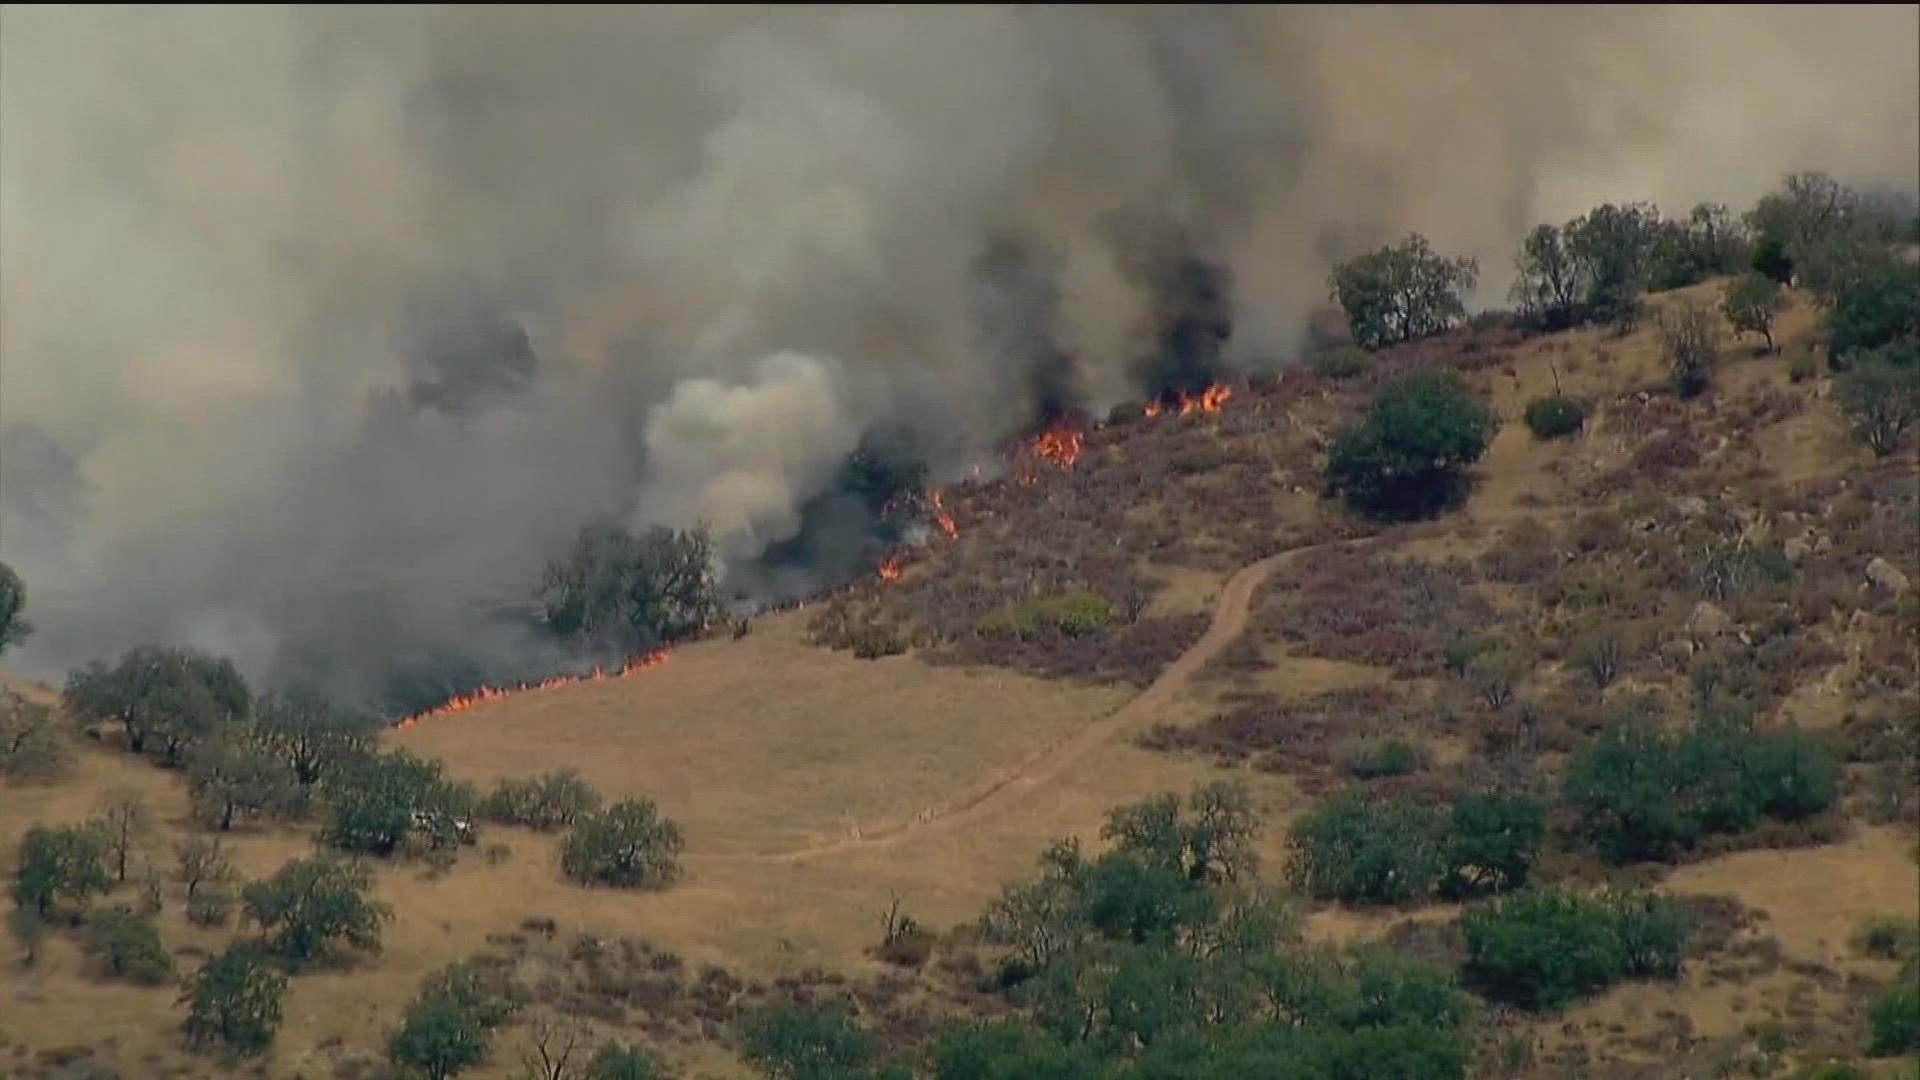 CalFire says the Casner Fire had burned 180 acres but the forward rate has been stopped.